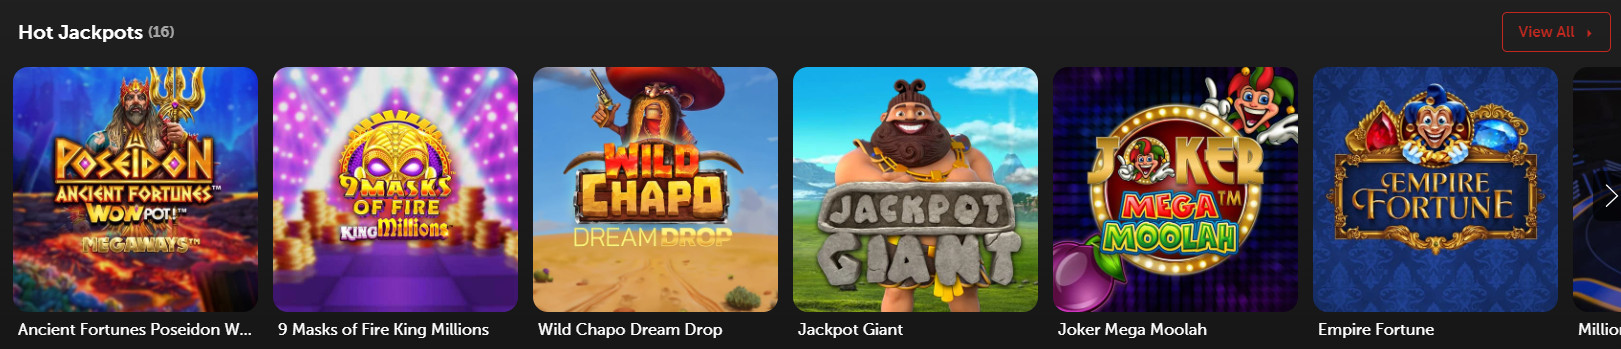 Jackpot Games Section 